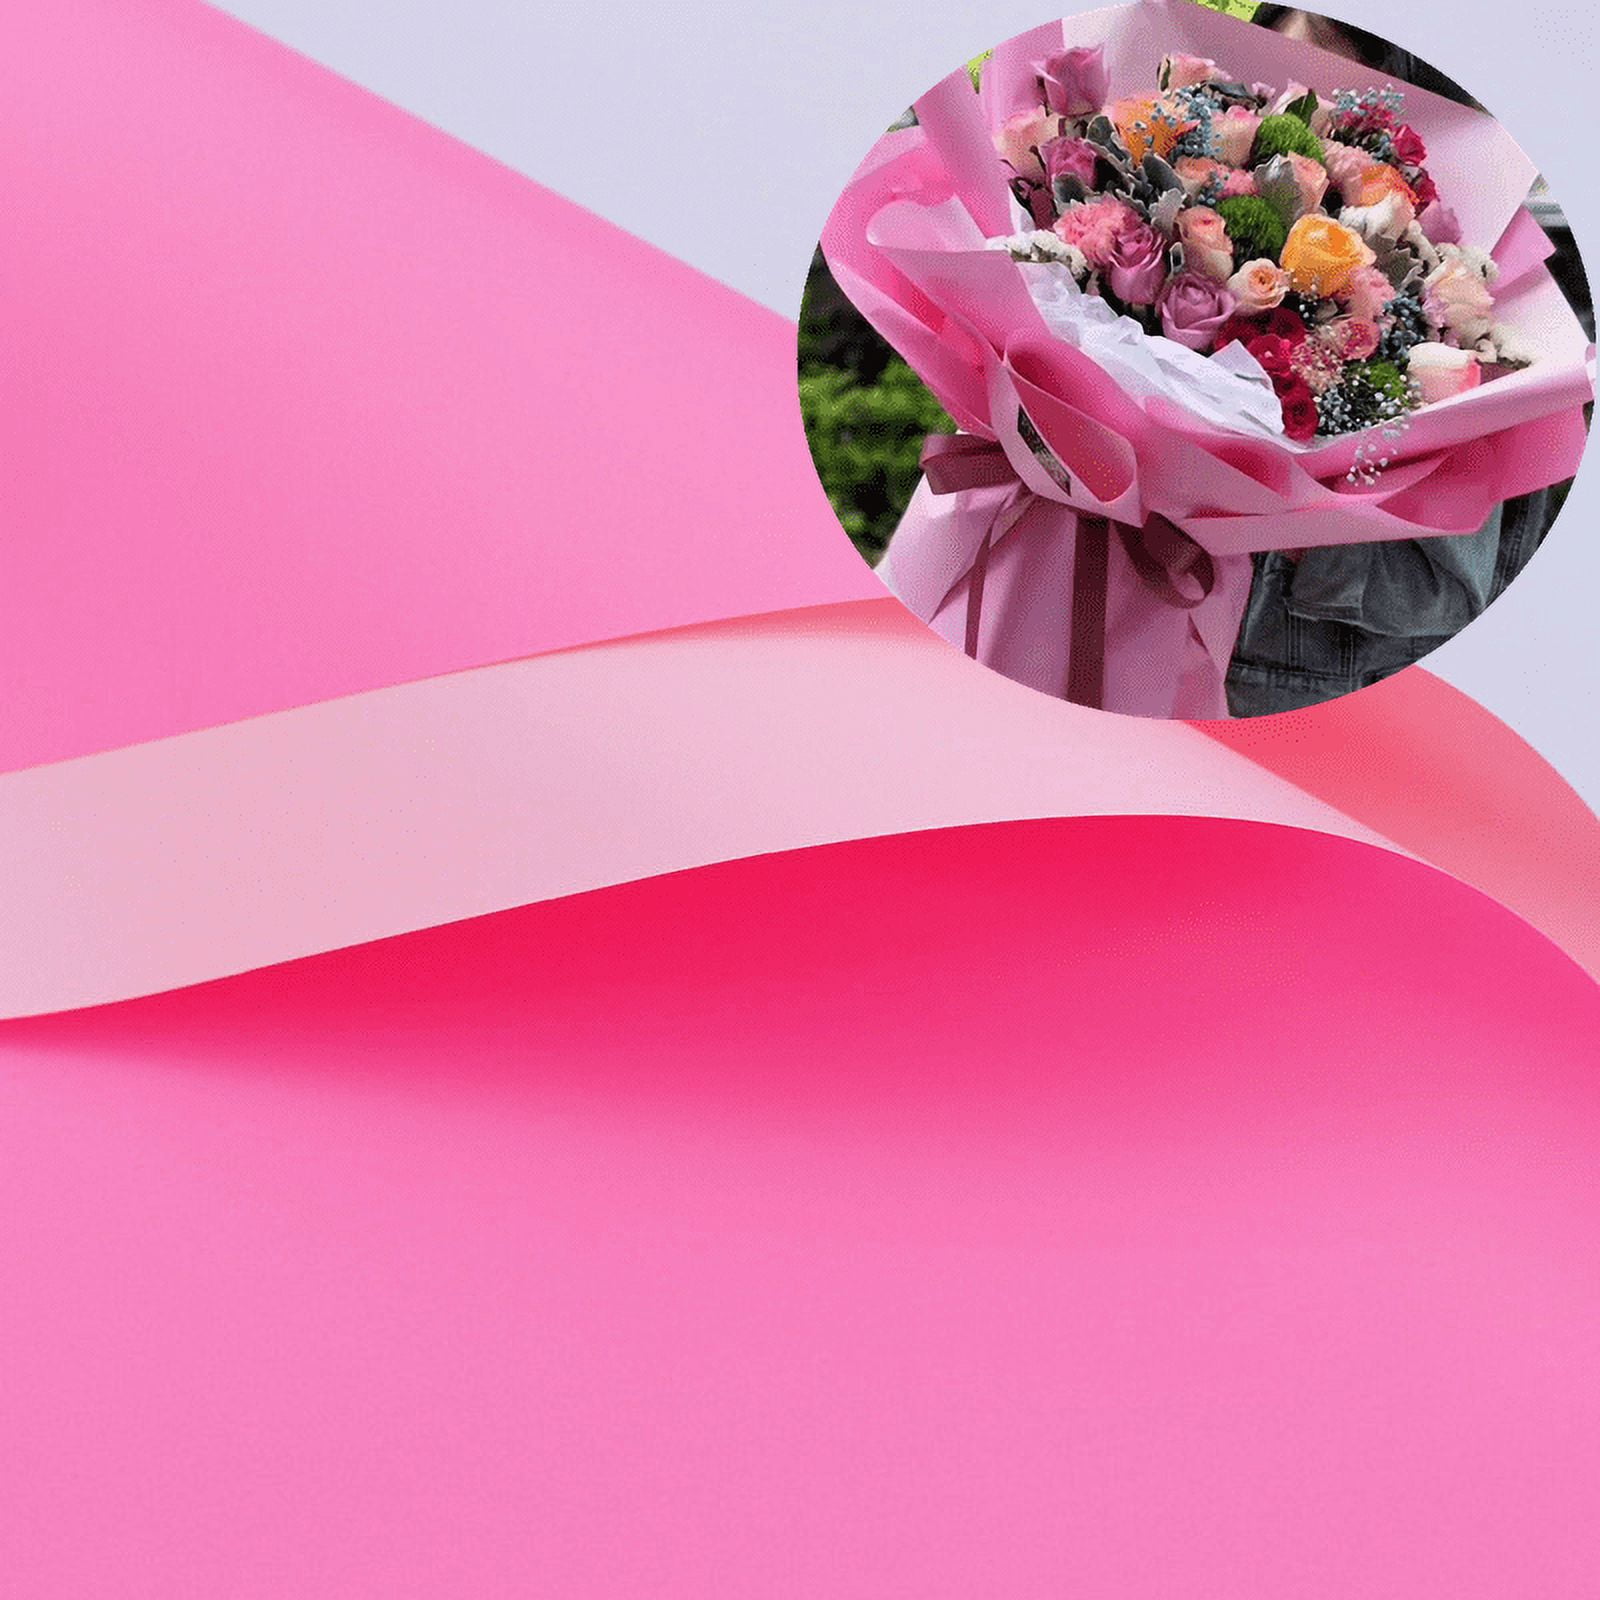 DUOER 10M/roll Plain Color Flower Wrapping Paper Translucent Waterproof  Matte Paper Gift Florist Wedding Rose Flower Wrapping Paper